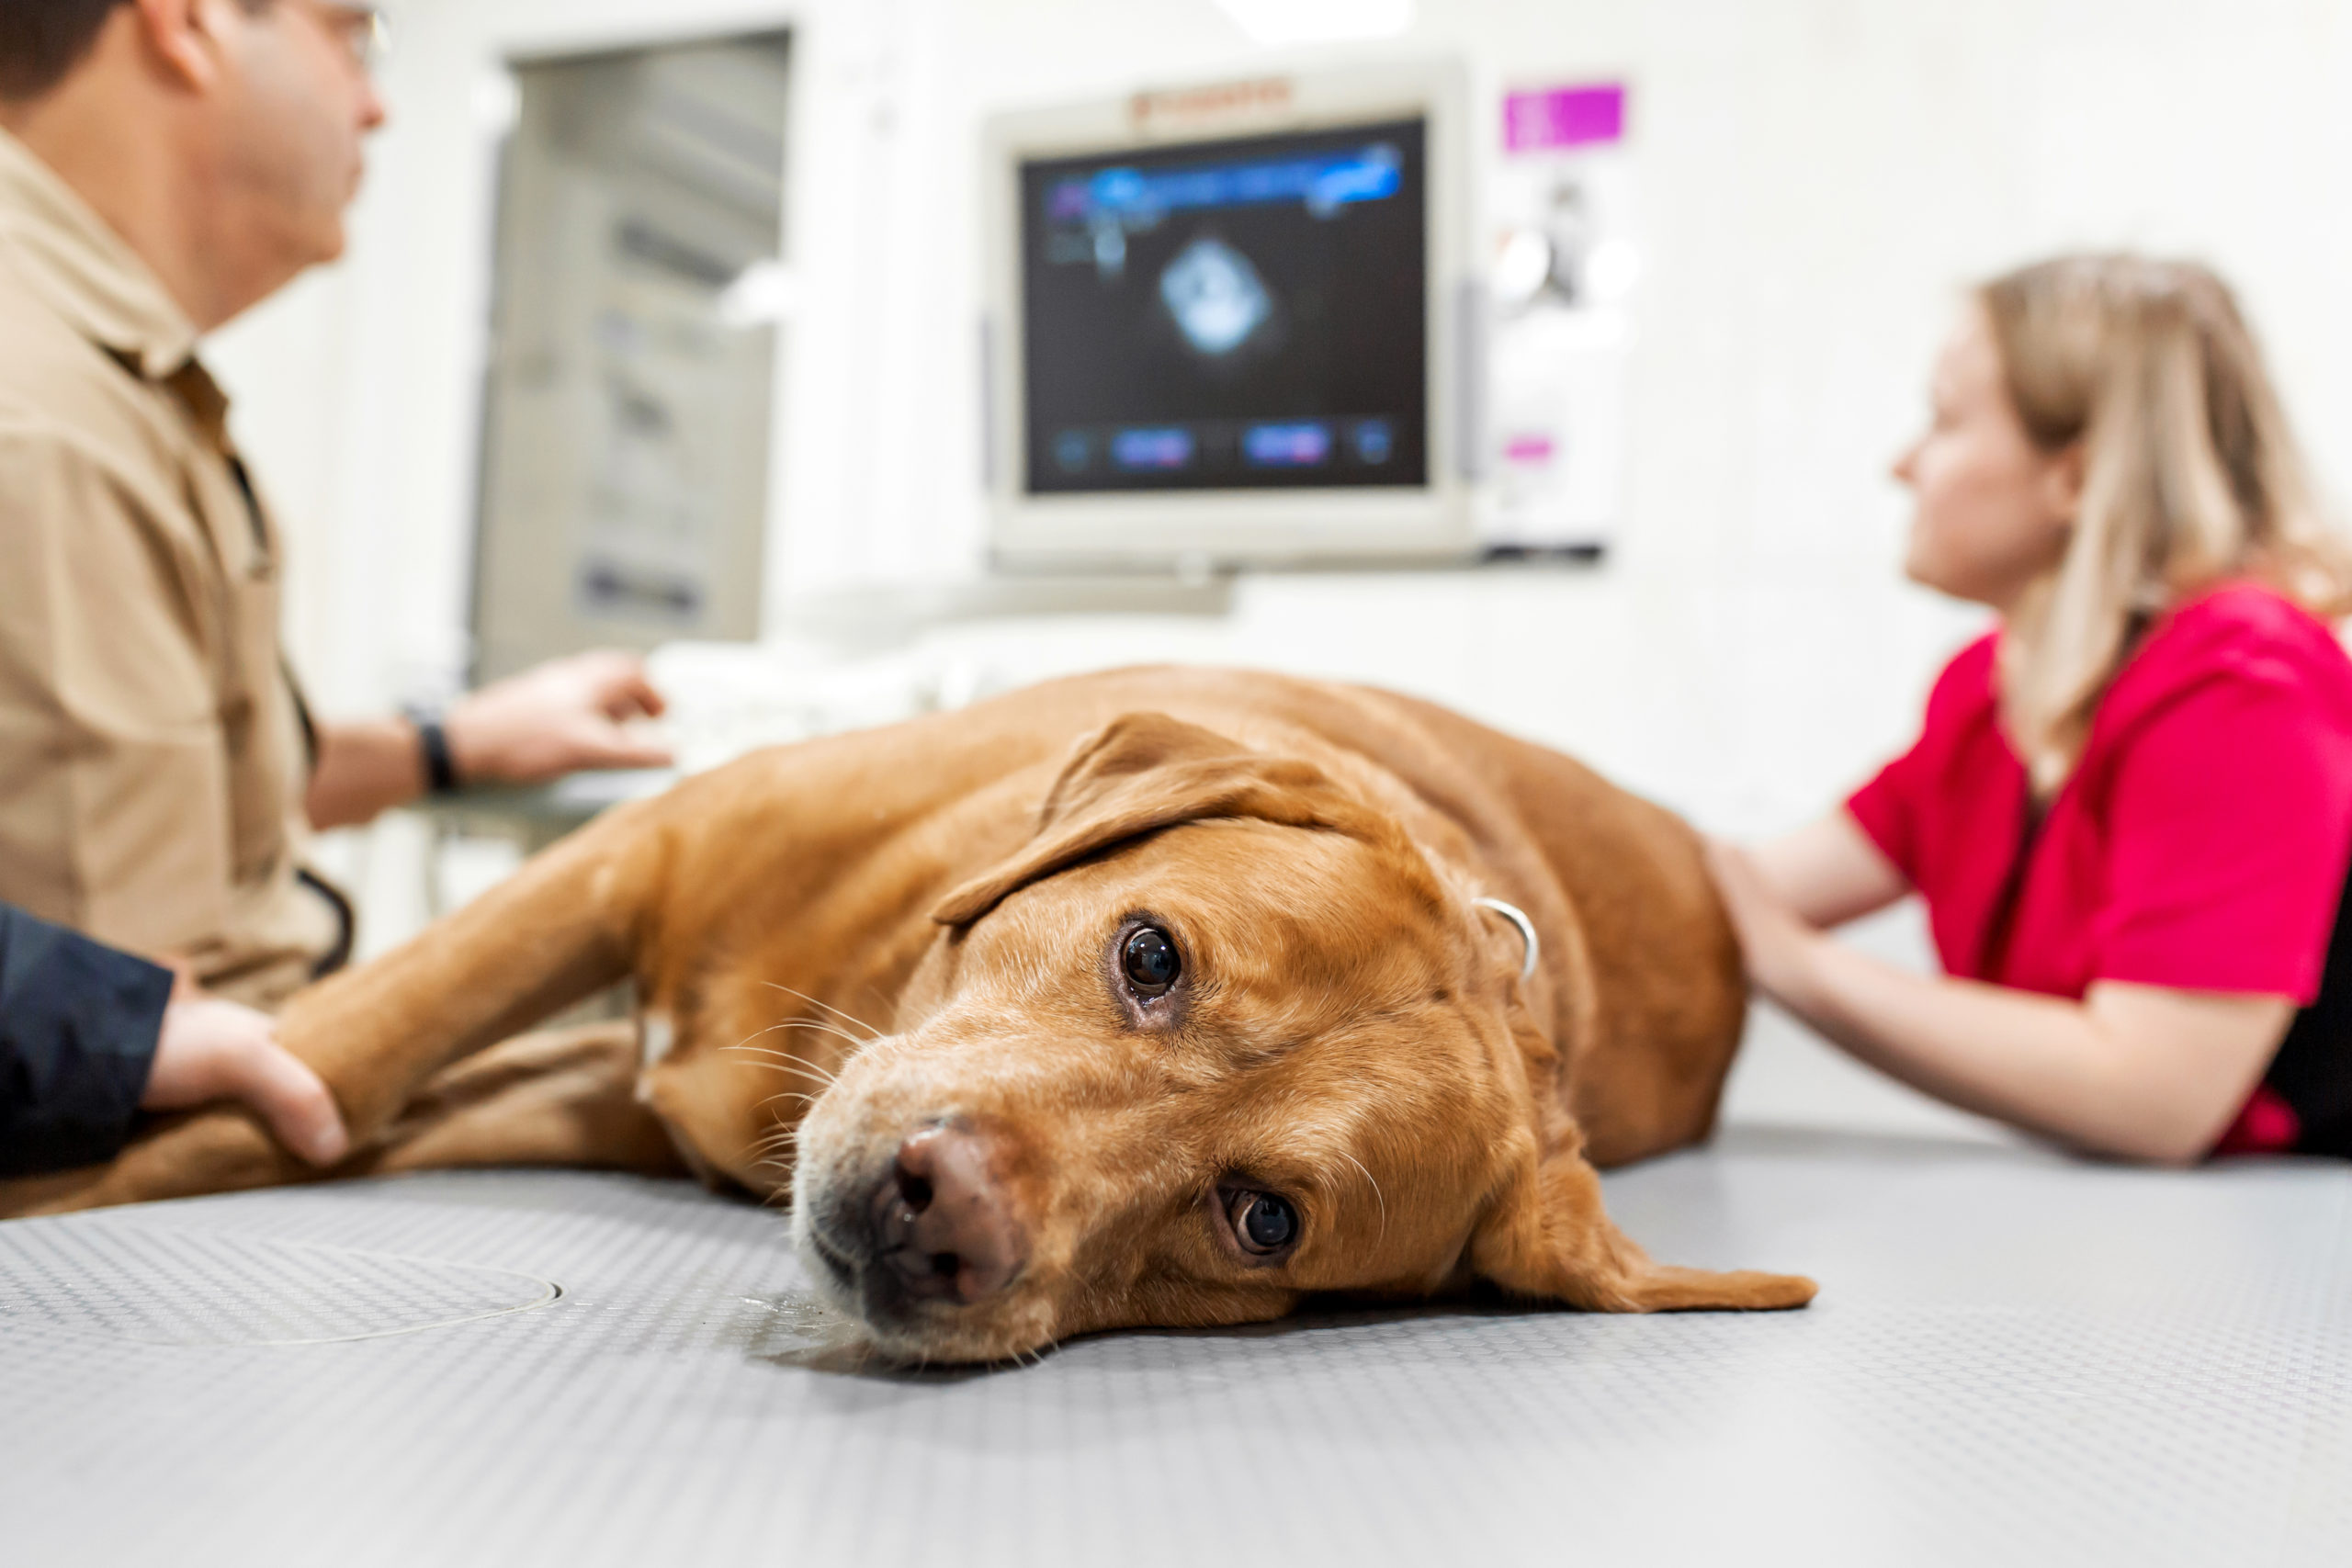 Doctor veterinarian makes ultrasound and cardiogram of the dog's heart in the office. Sick dog breed Labrador looking at the camera close-up